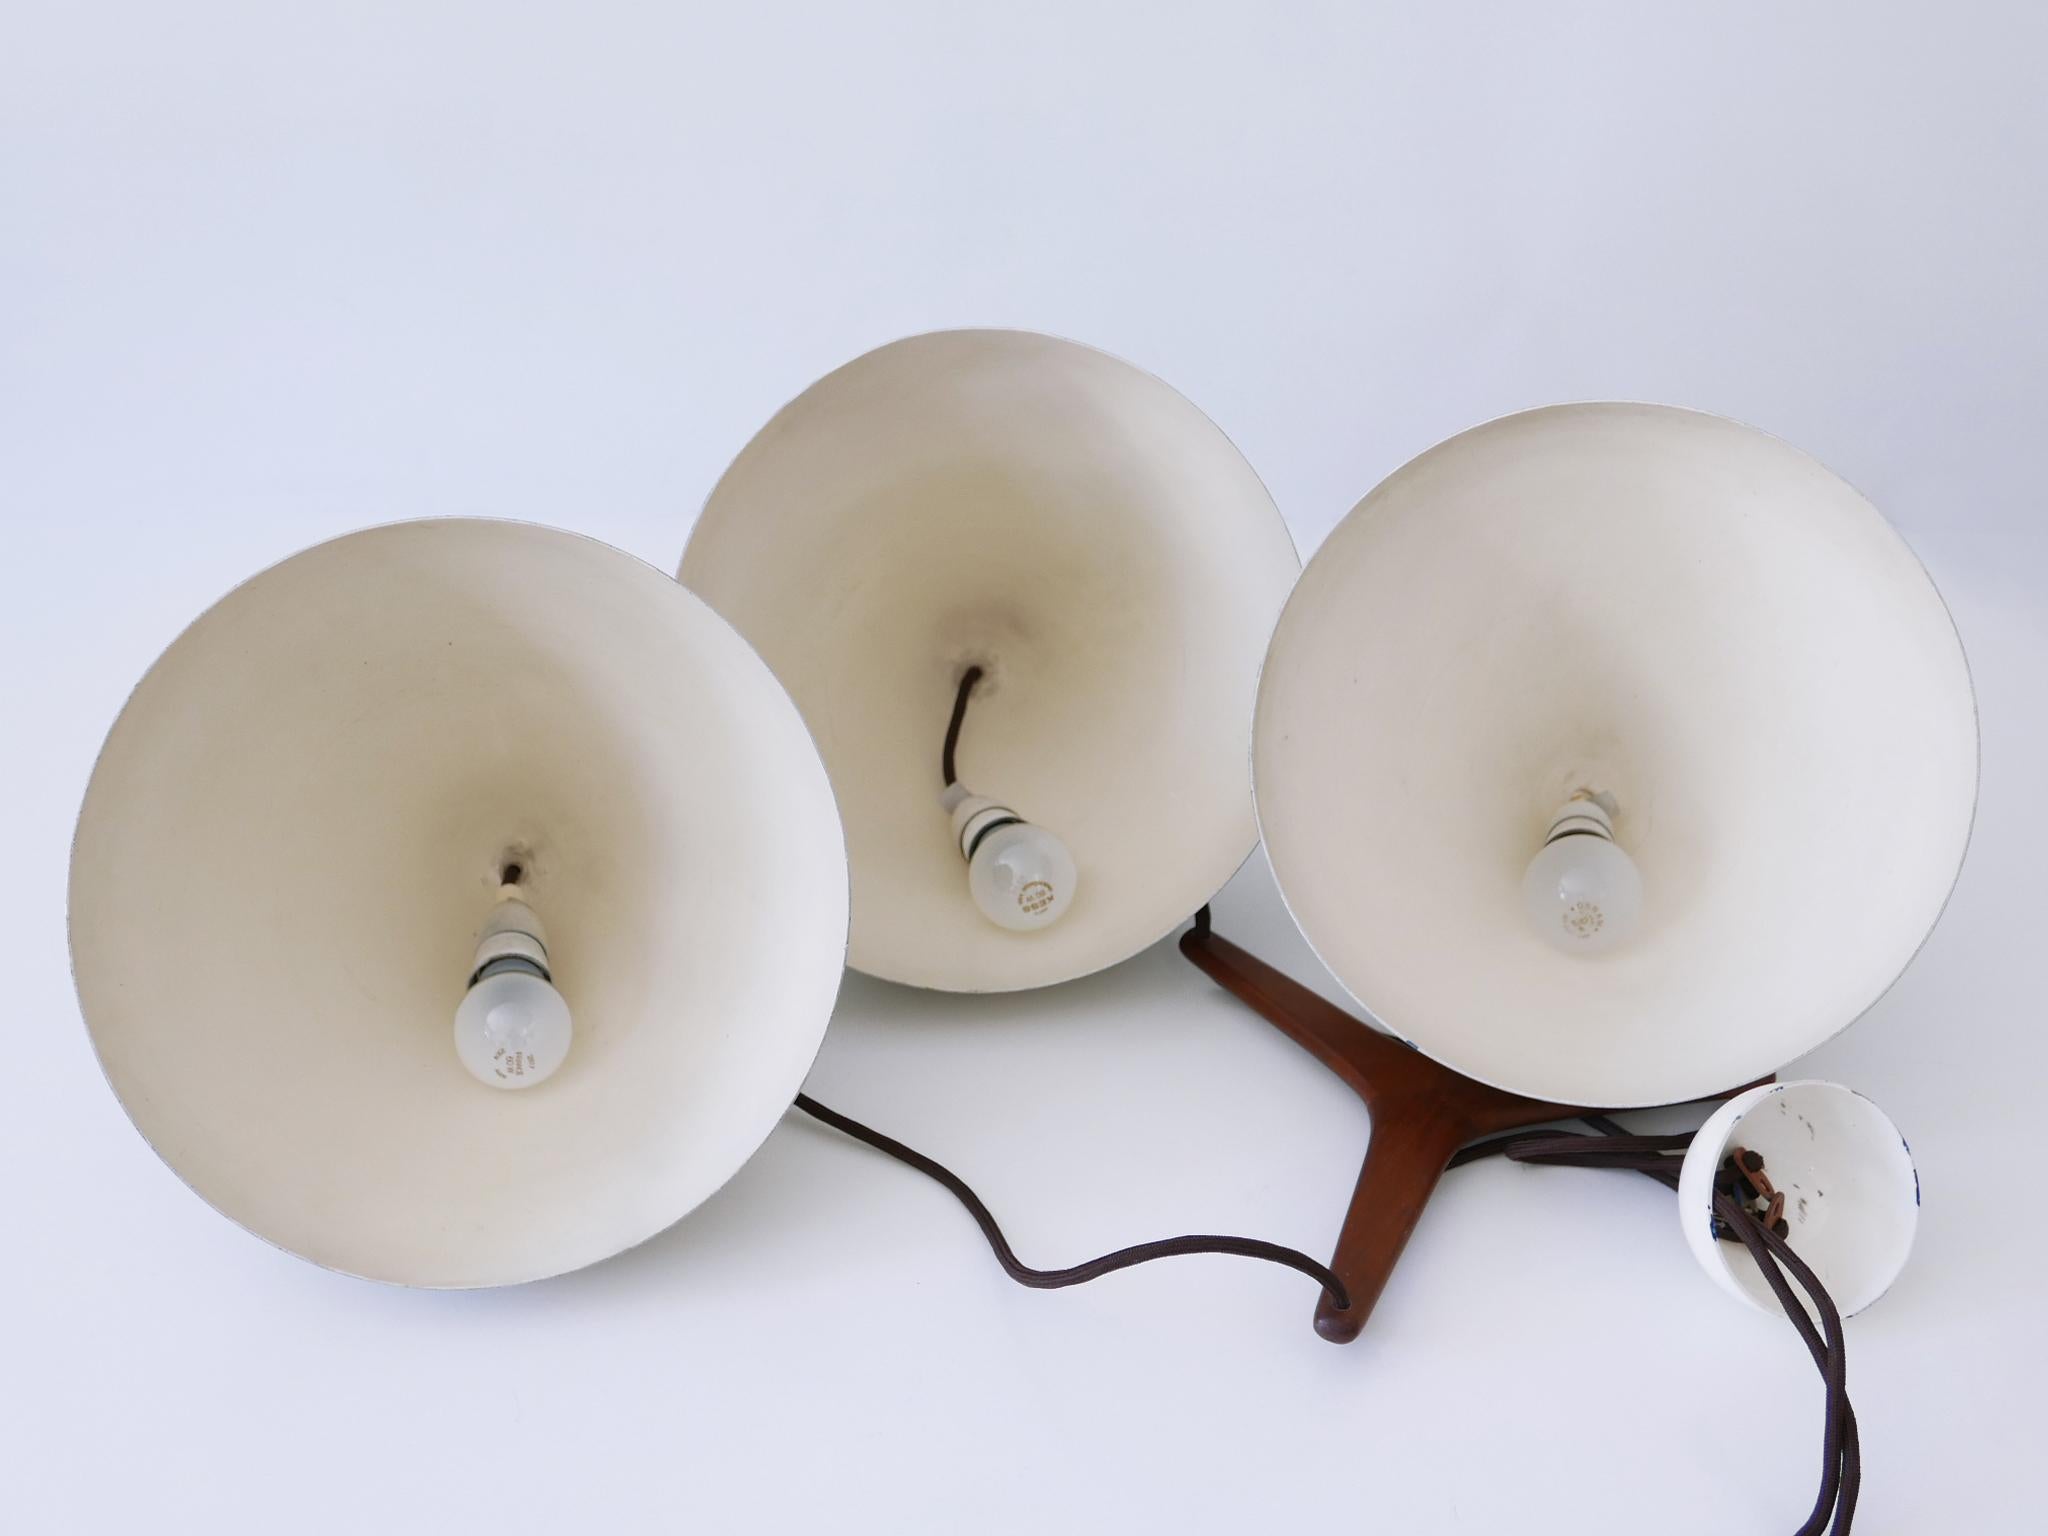 Elegant Cascading Pendant Lamp by Lisa Johansson-Pape for Orno Finland 1960s For Sale 13